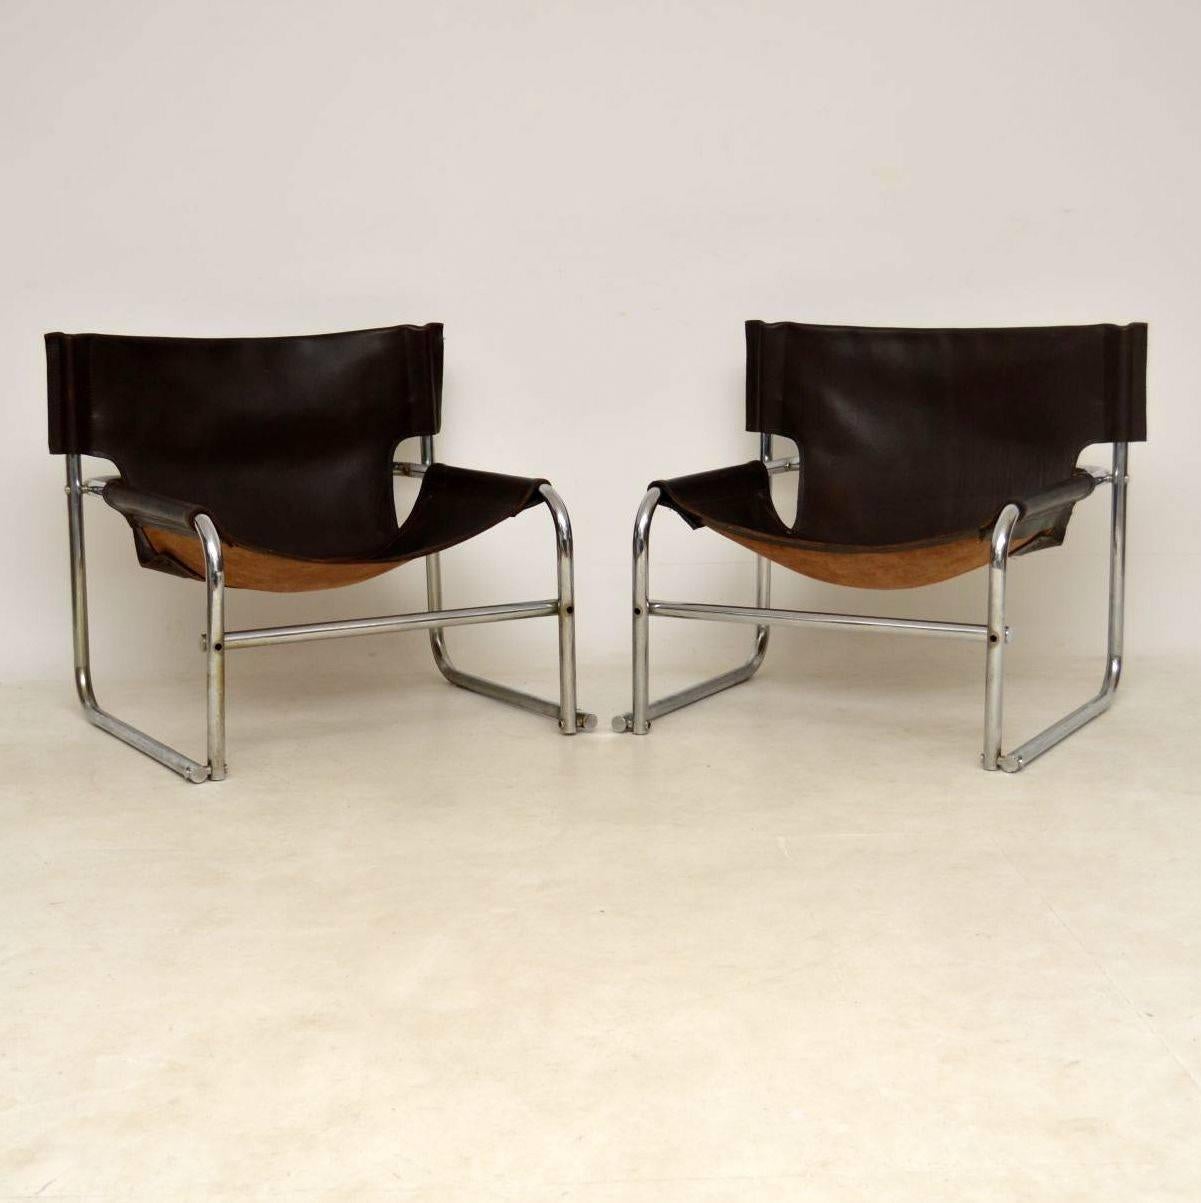 A stylish and iconic pair of vintage armchairs in tubular steel and leather, these were designed by Rodney Kinsman for his company OMK. They were the first armchairs that he designed, titled the T1 chairs, they were first designed in 1967. These are